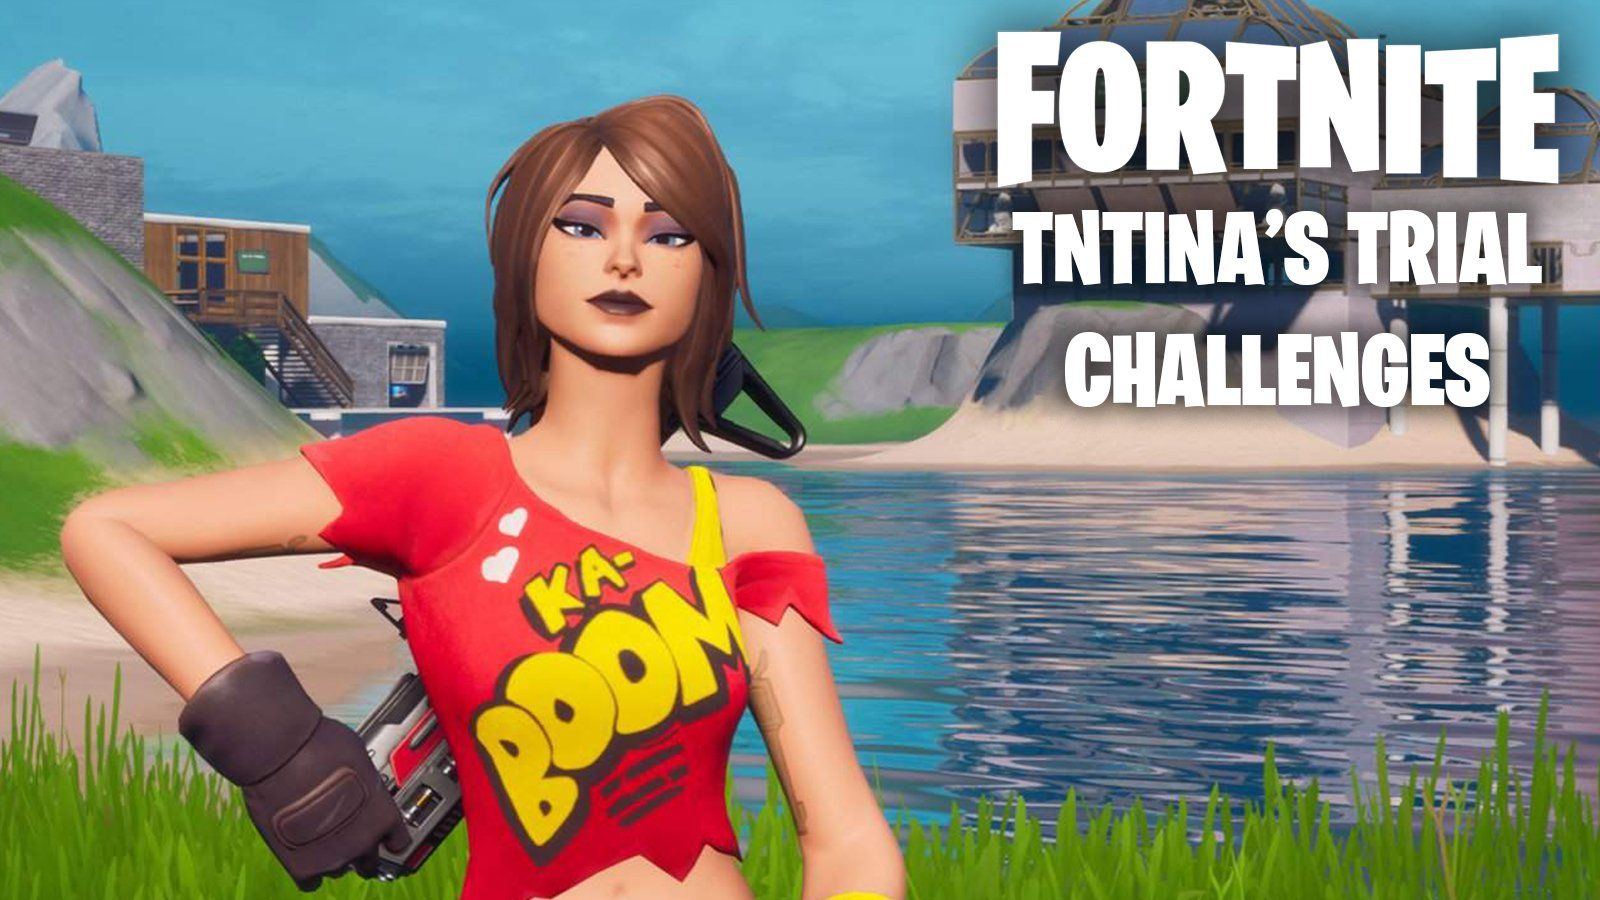 How to complete Fortnite TNTina's Trial Week 3 challenges